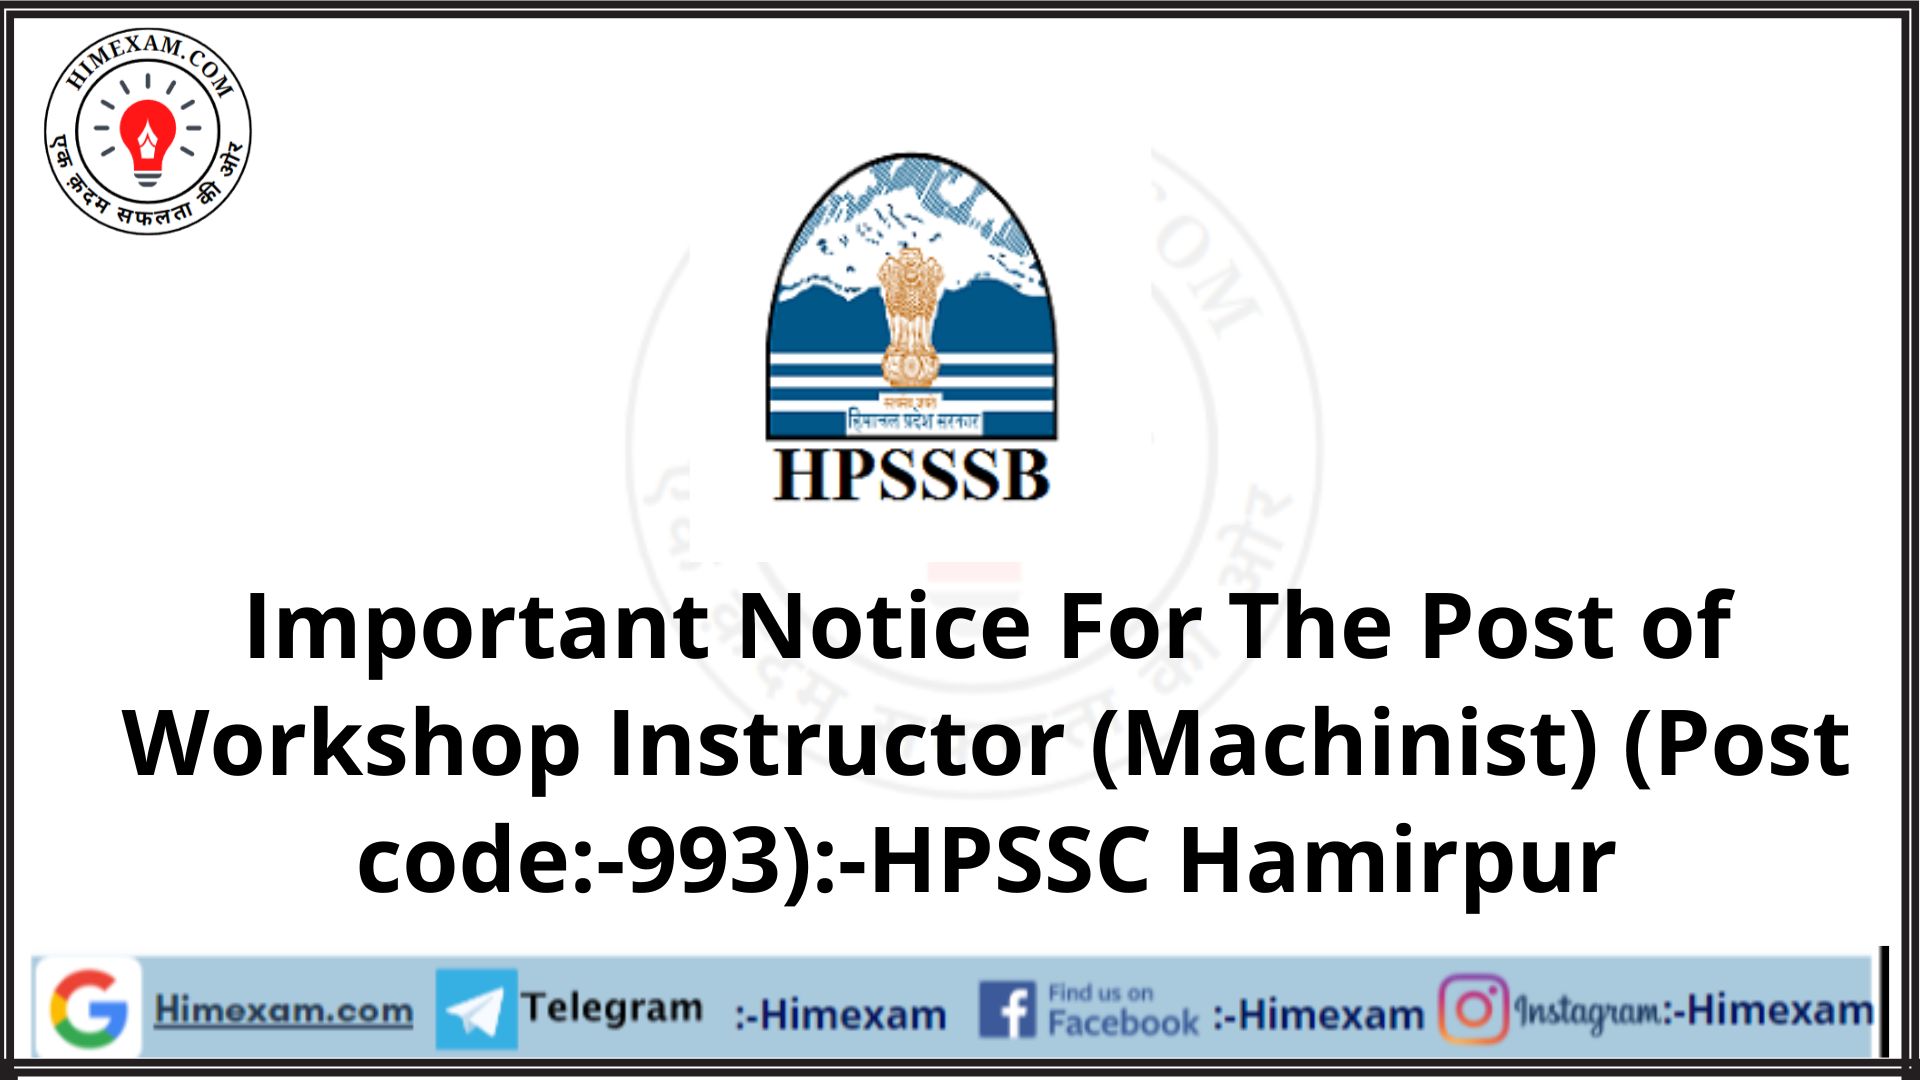 Important Notice For The Post of Workshop Instructor (Machinist) (Post code:-993):-HPSSC Hamirpur